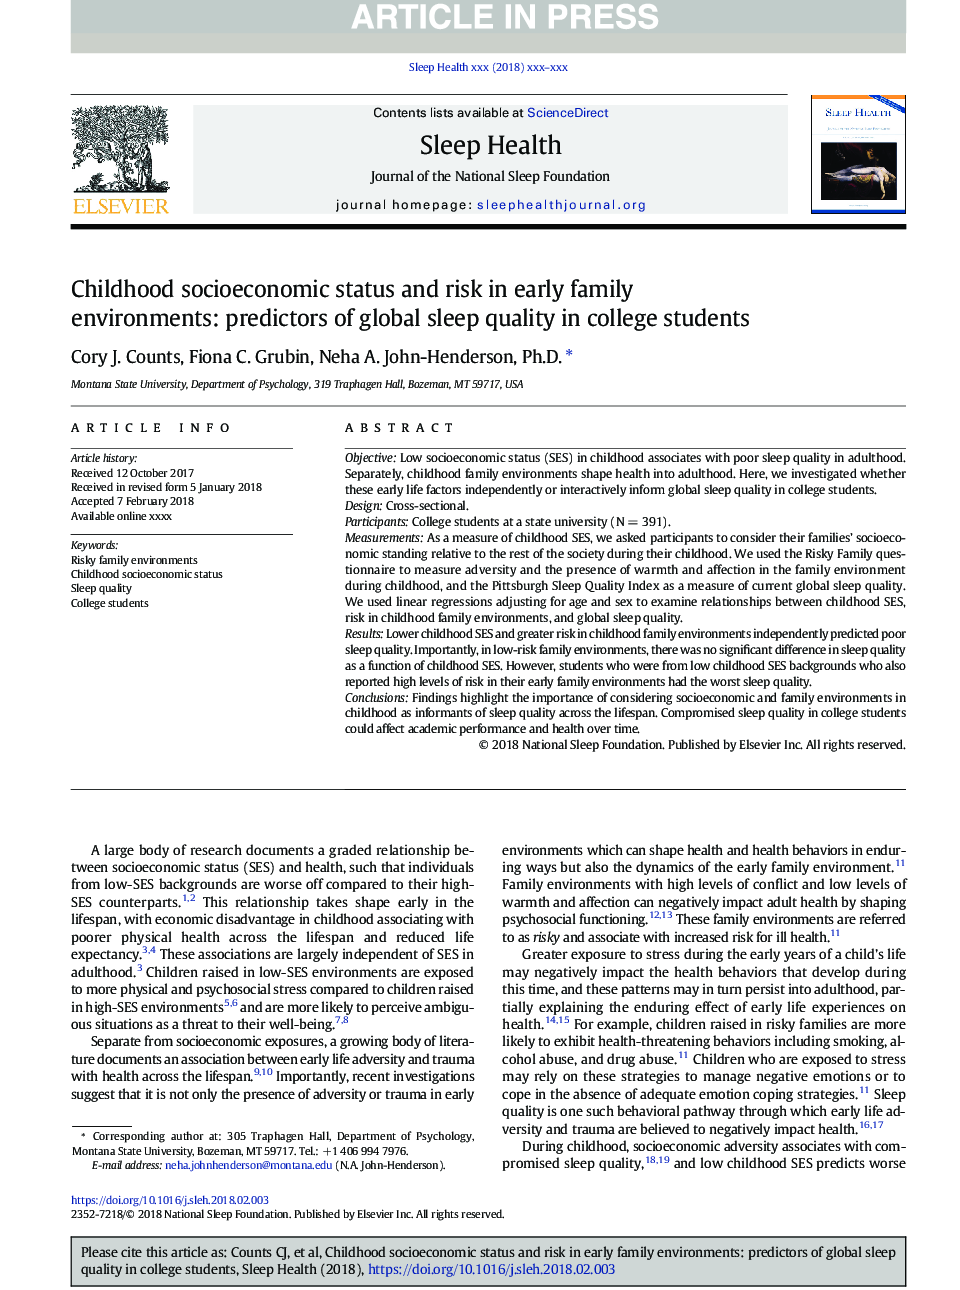 Childhood socioeconomic status and risk in early family environments: predictors of global sleep quality in college students